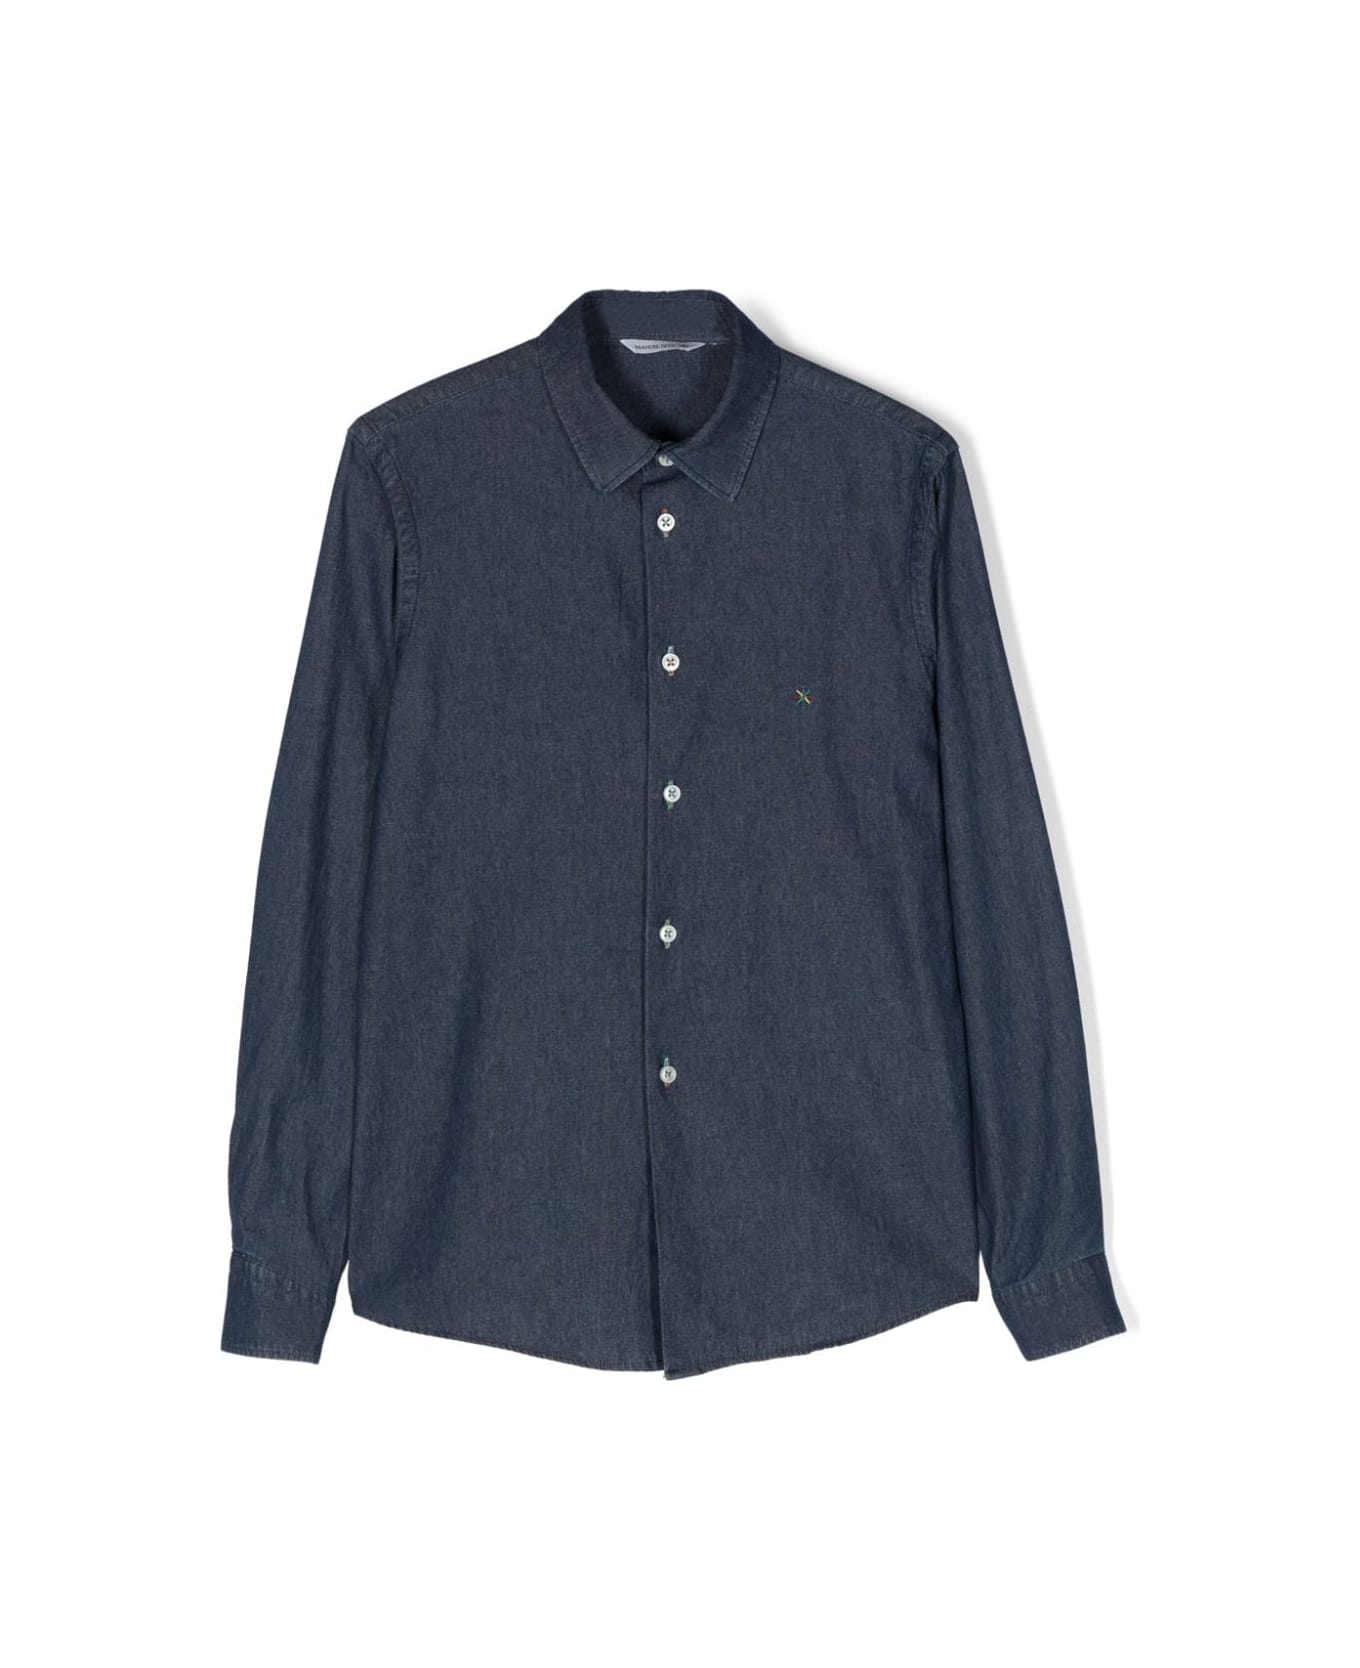 Manuel Ritz Shirt With Embroidery - Blue